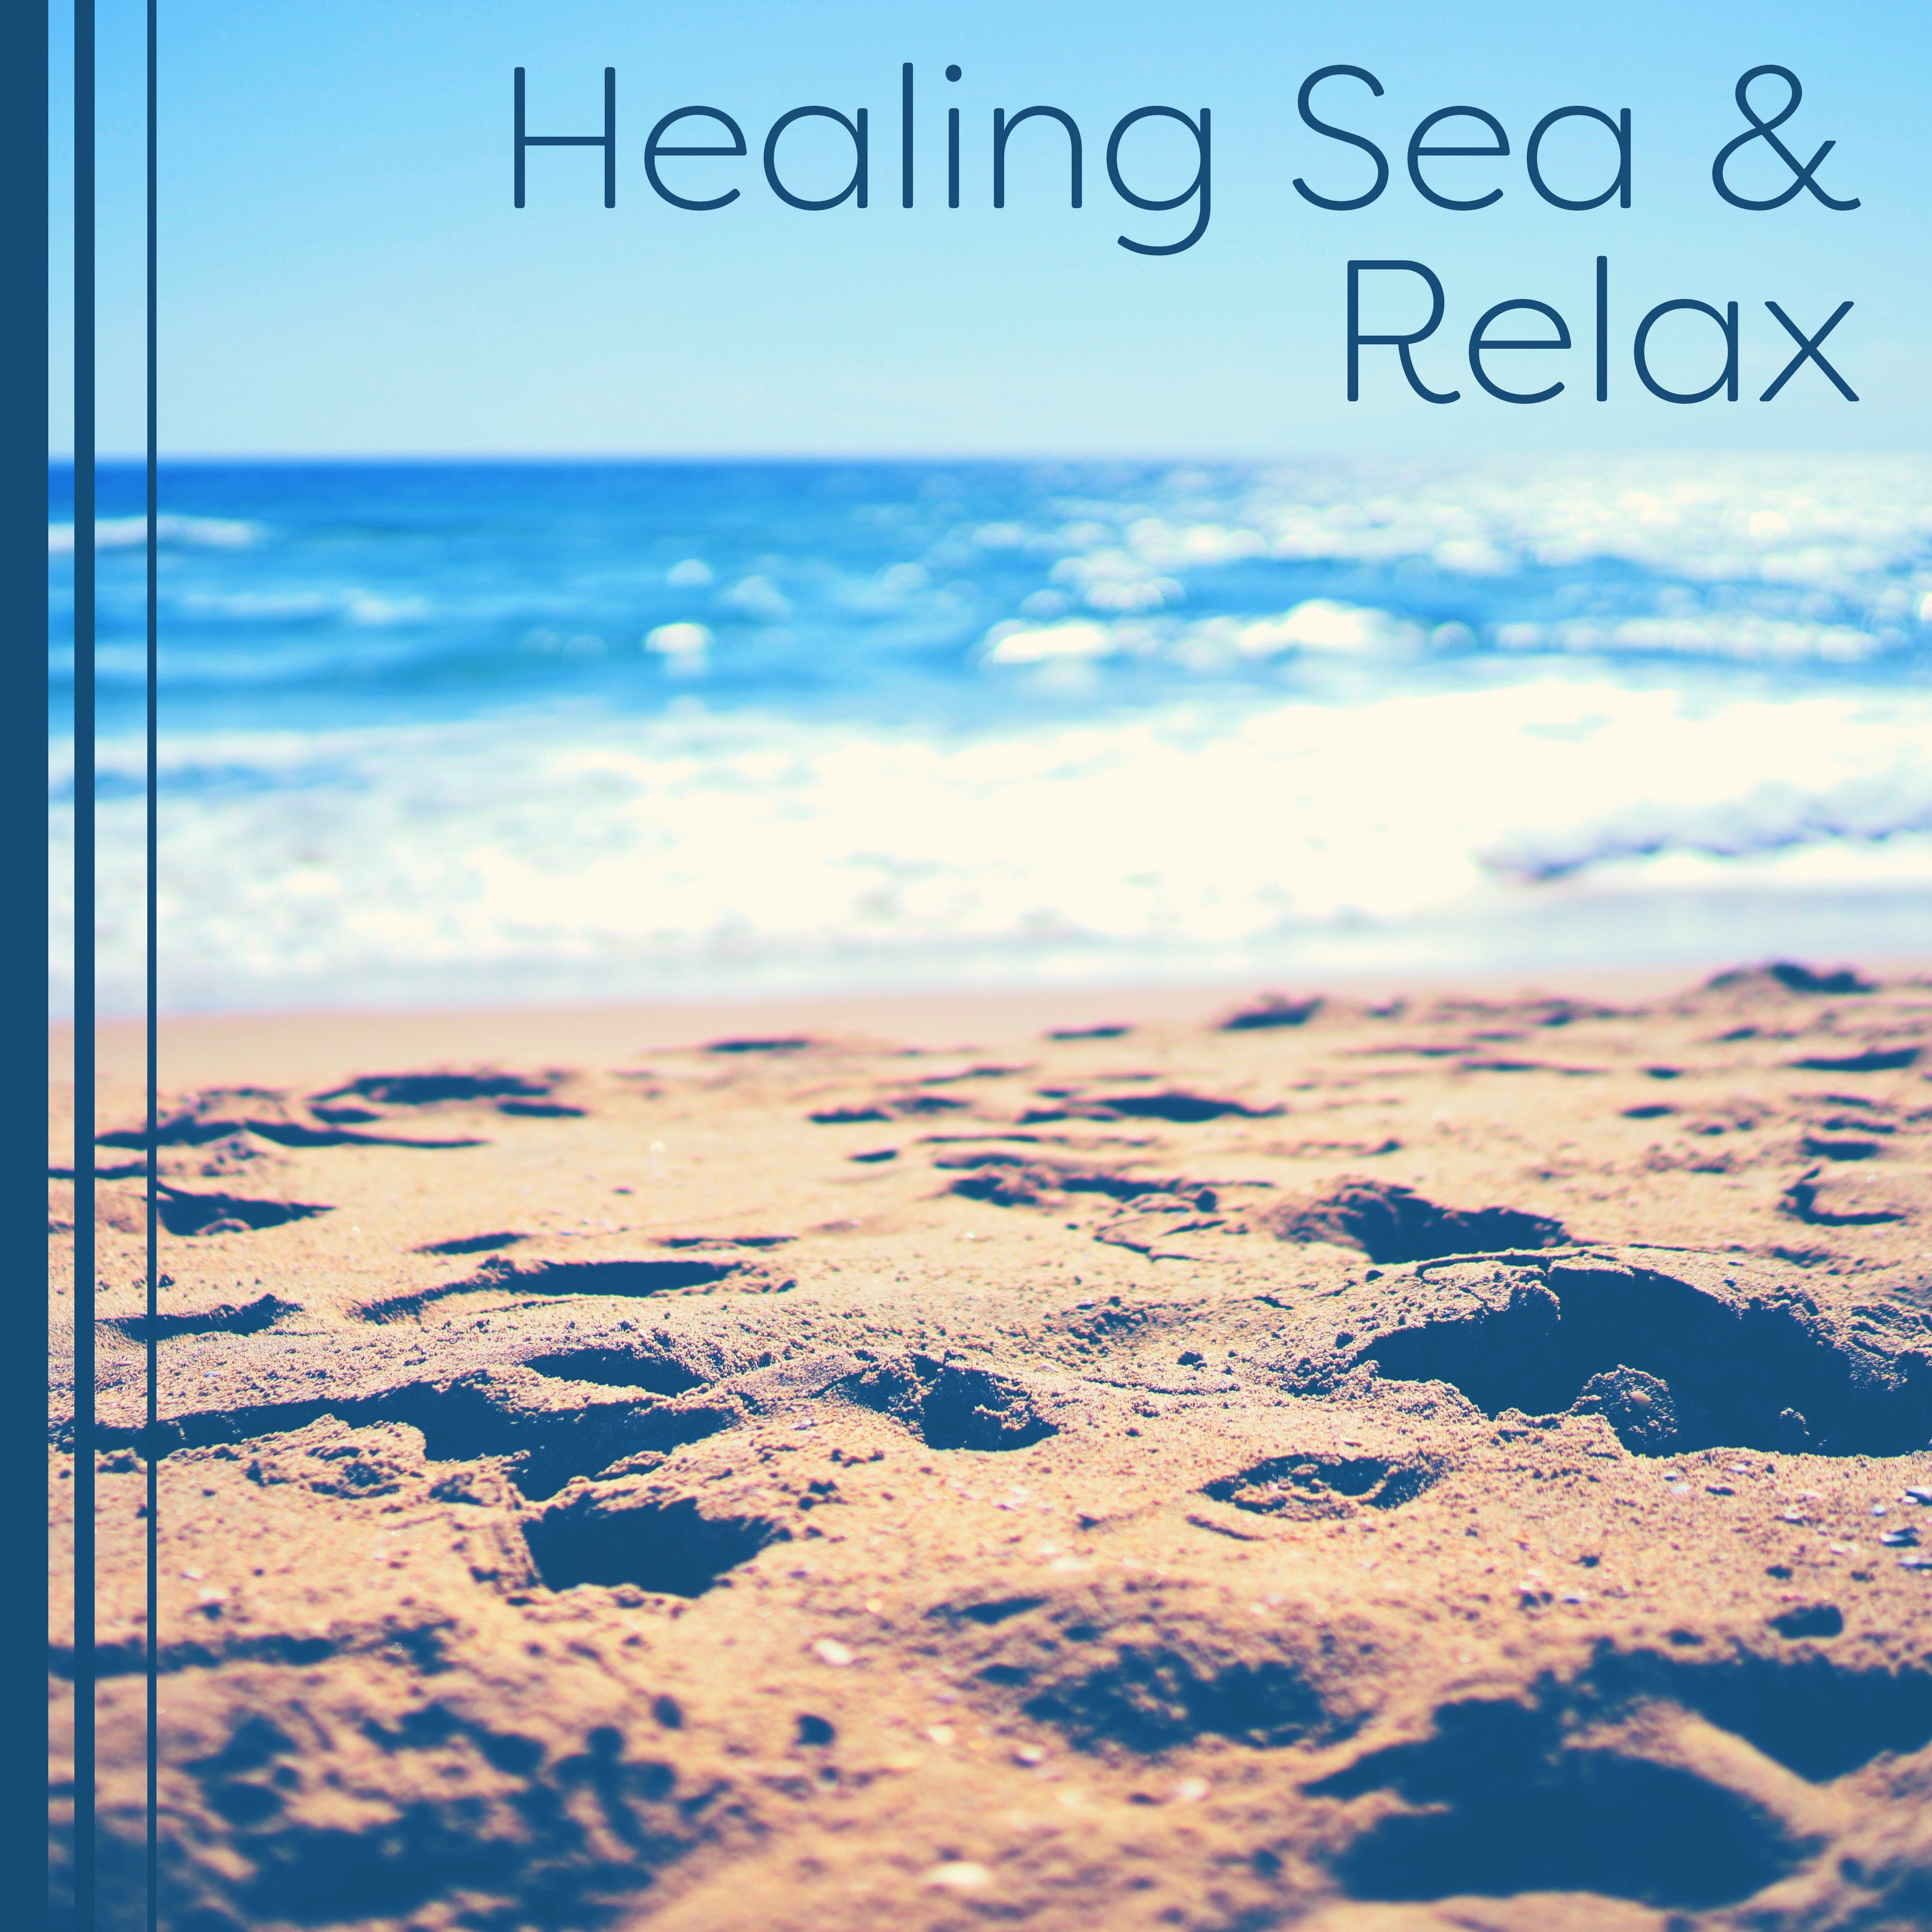 Healing Sea & Relax – Nature Sounds for Relaxation, Deep Relief, Tropical Waves, Soothing Water, Relaxed Mind